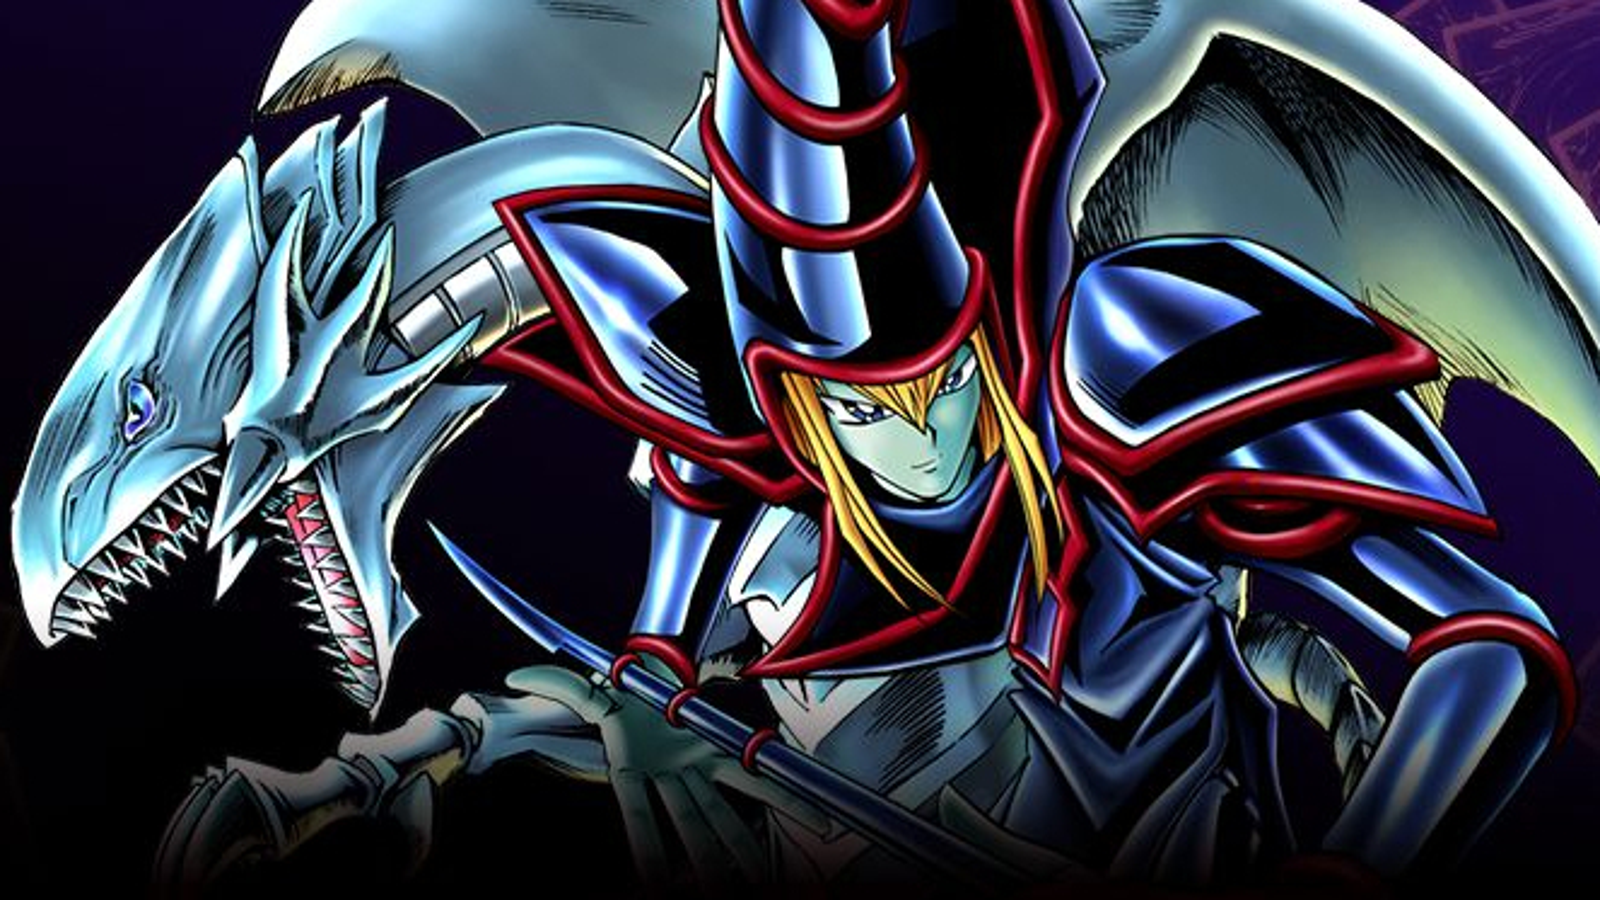 Official Yu-Gi-Oh! Site : Watch full length Yu-Gi-Oh! episodes online.